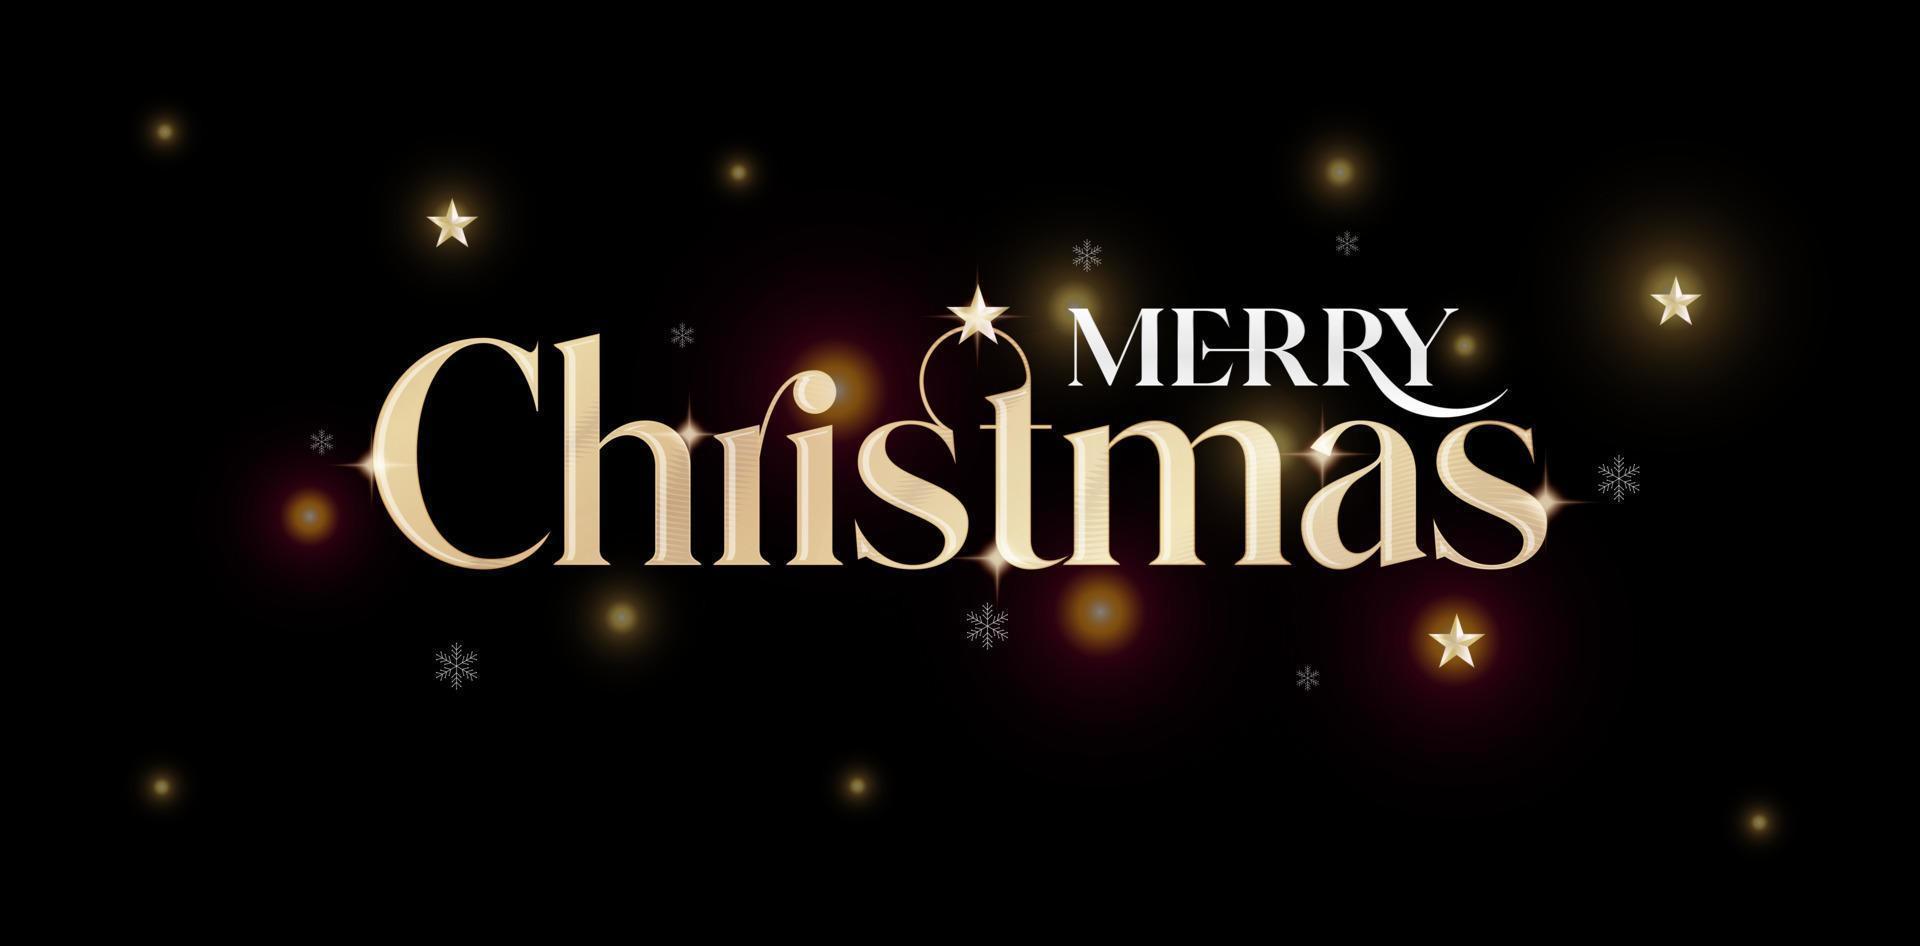 merry christmas background light emerald green. christmas font effect golden colors. applicable for greeting cards, invitation, sign and banners. vector